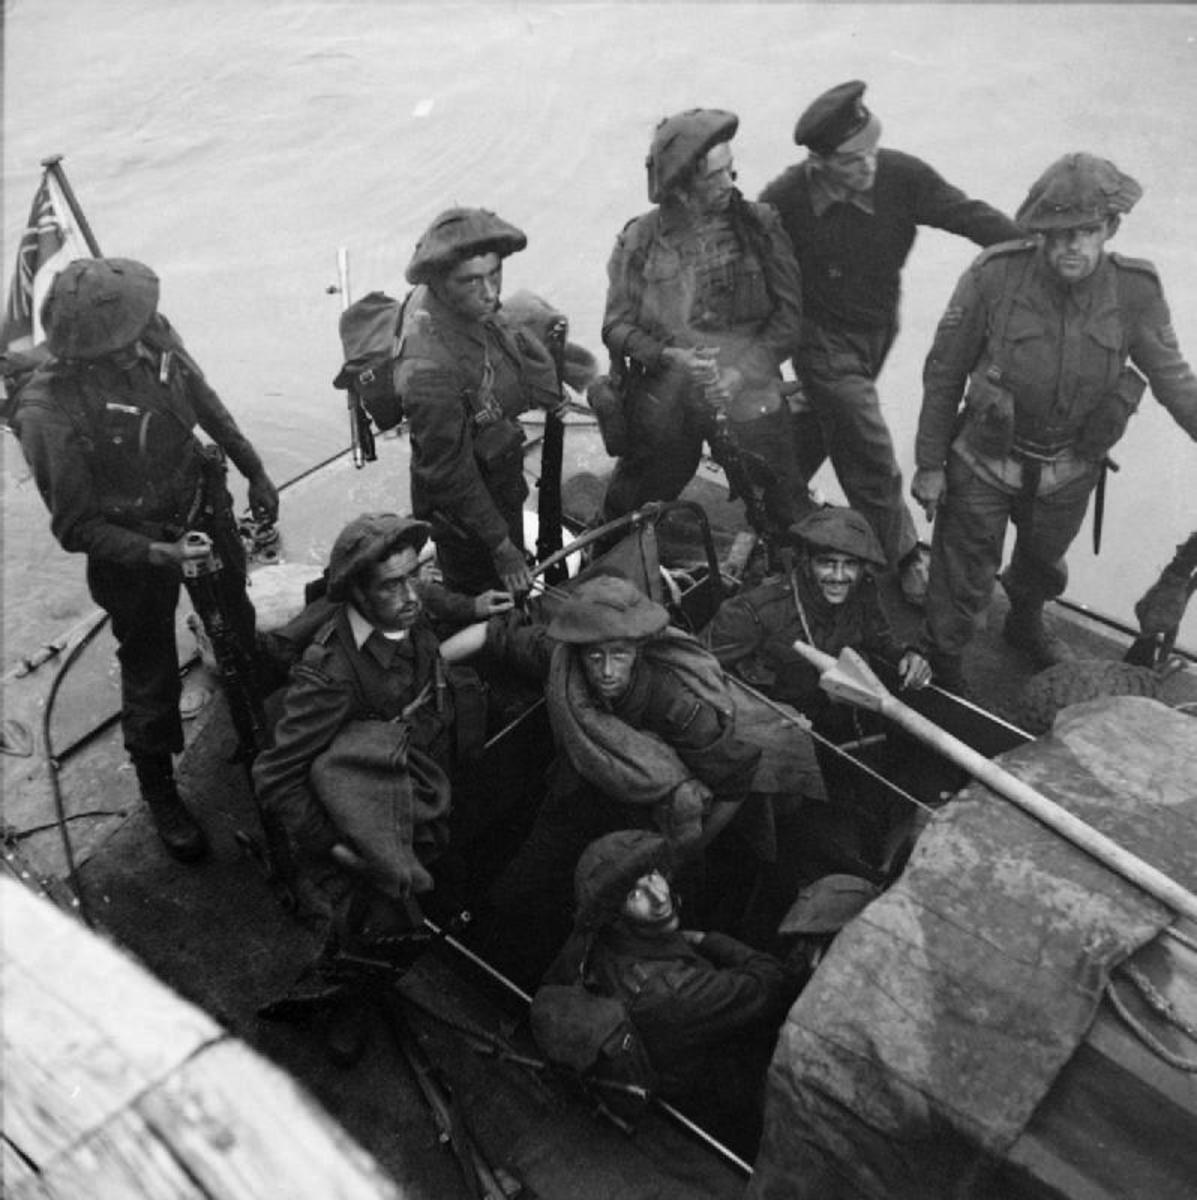 Men of No.3 Commando being ferried back after the abortive raid